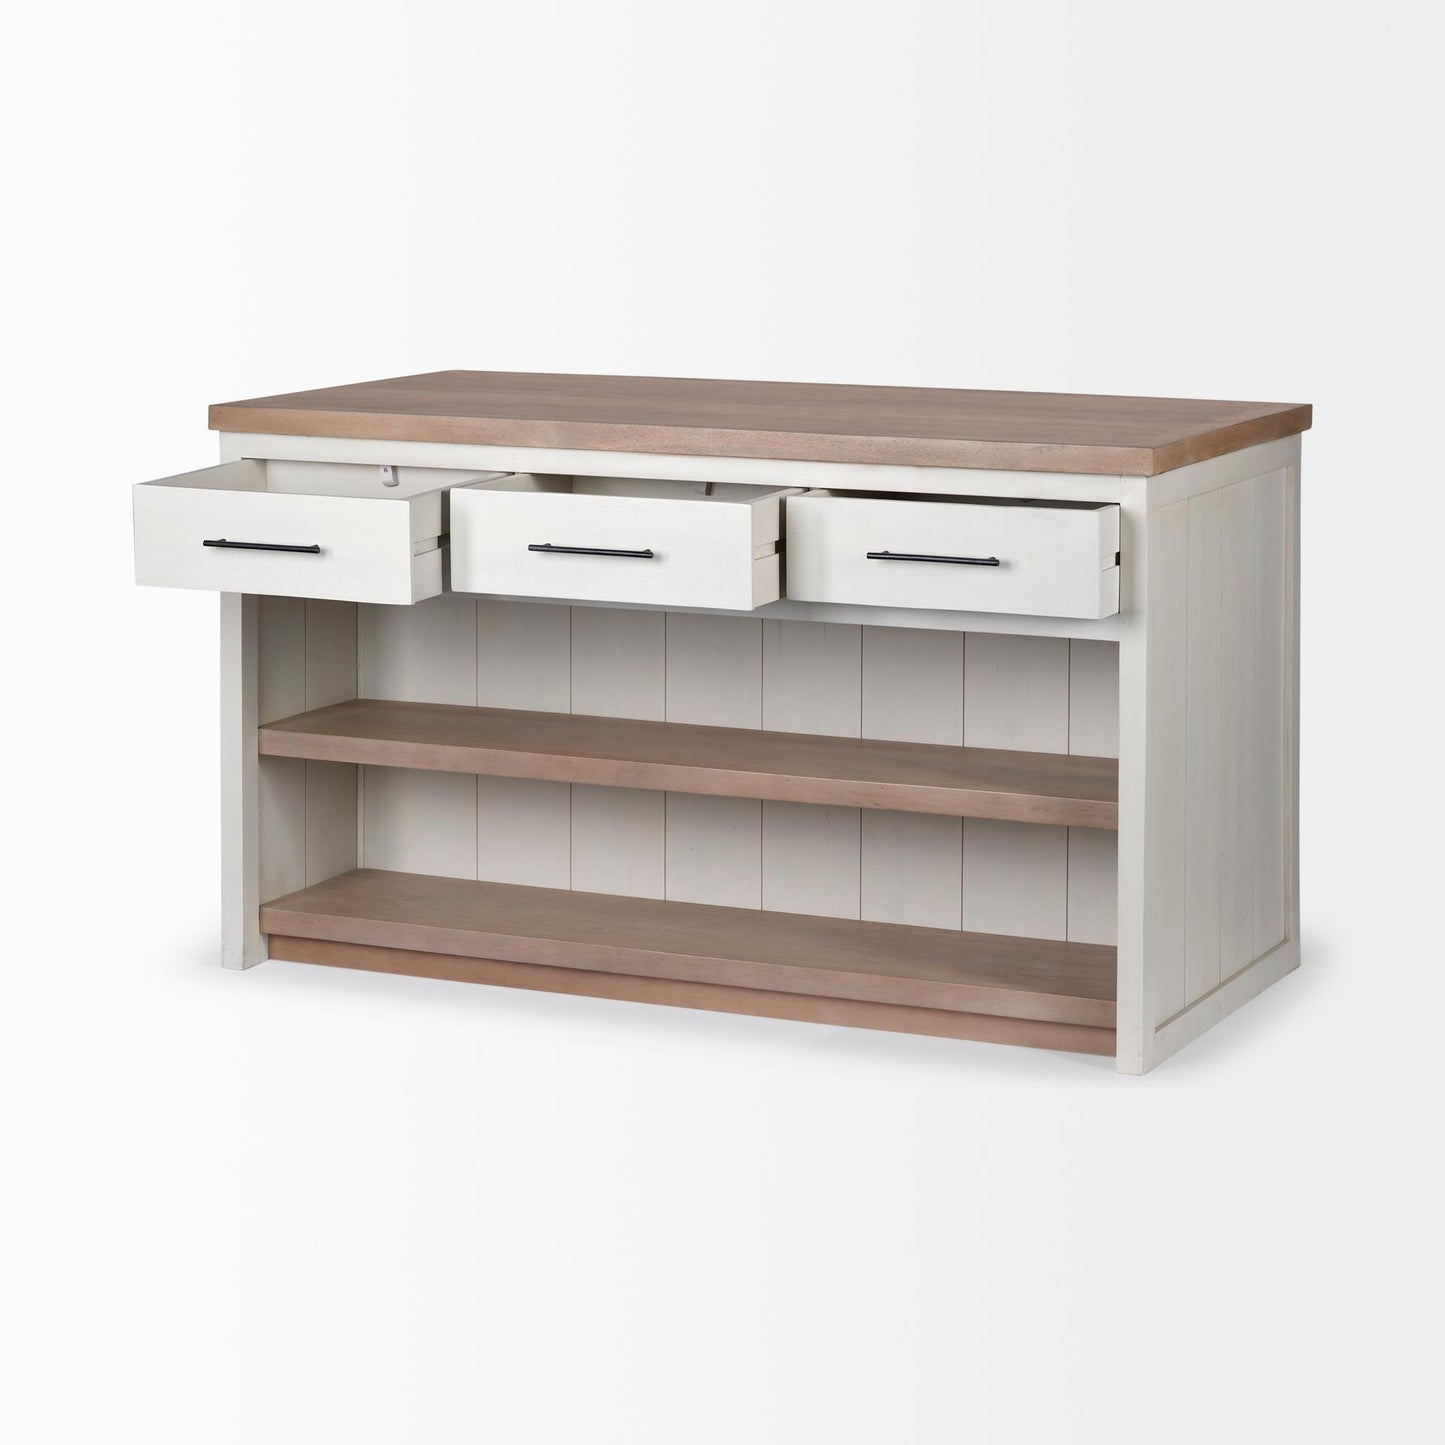 Fairview II White and Brown Two-Tone Stain Solid Wood Kitchen Island